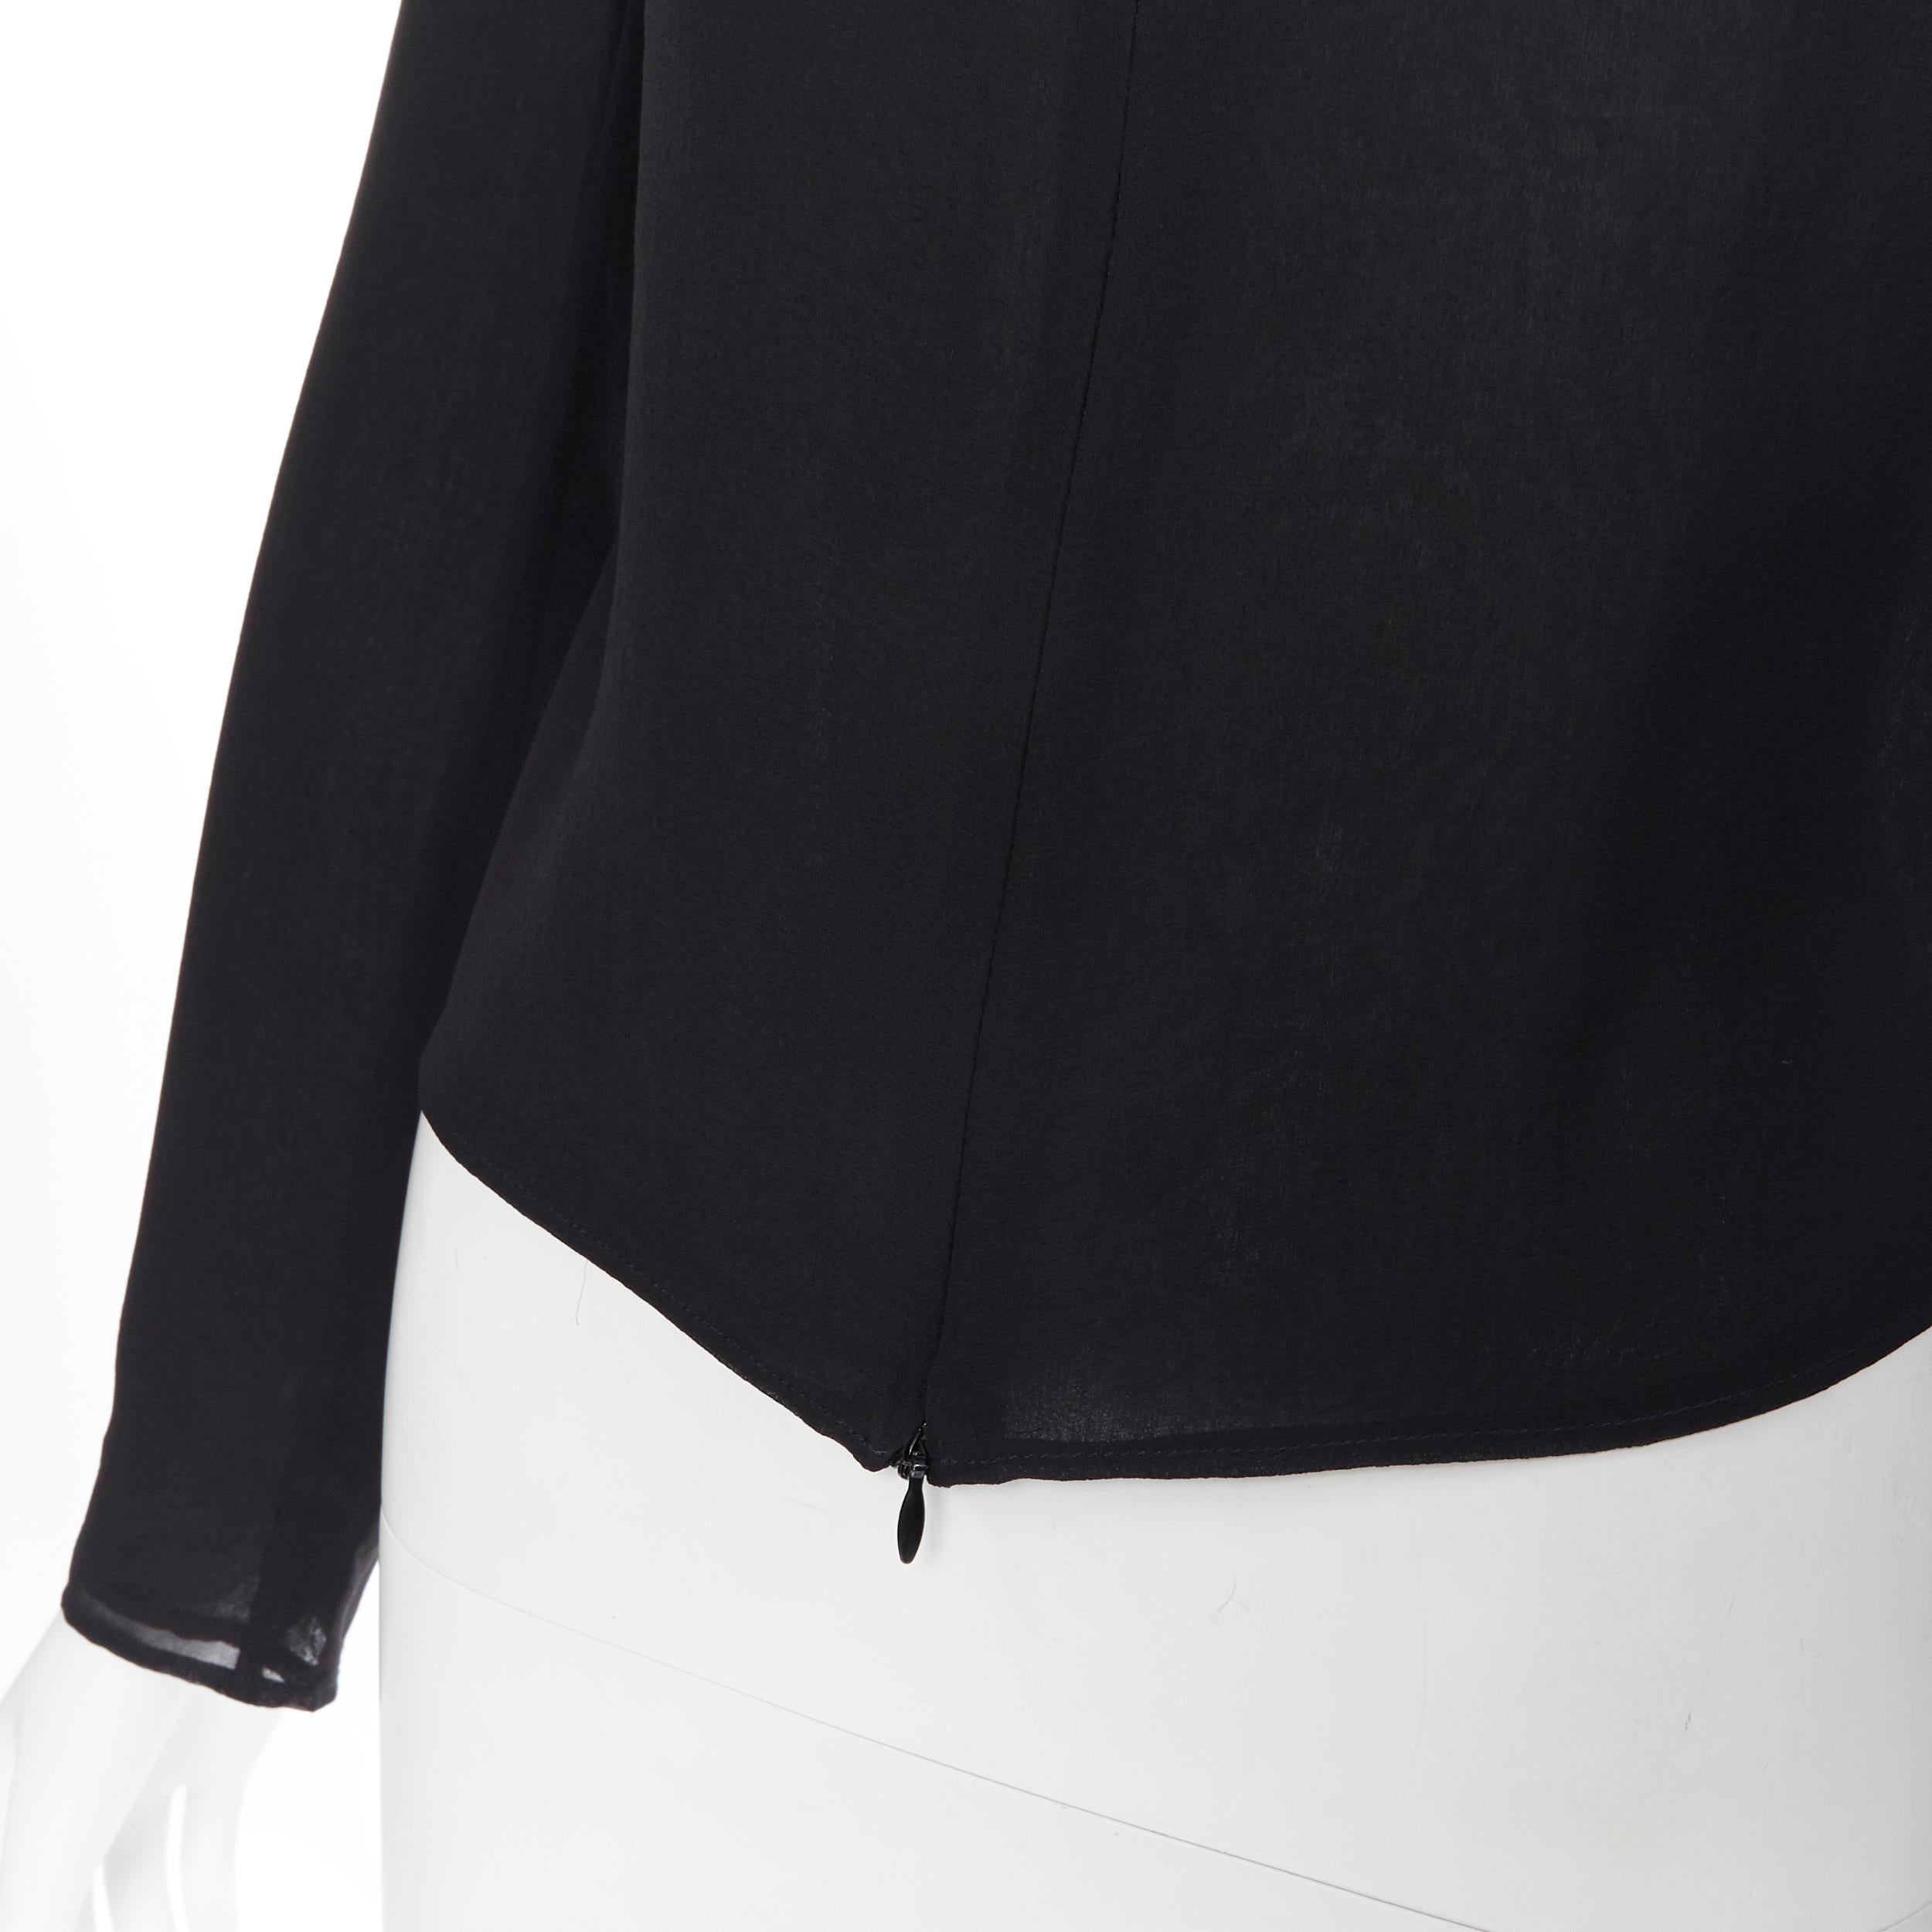 COSTUME NATIONAL 100% silk black wide boat neck zip front top IT38 XS
Brand: Costume National
Model Name / Style: Silk top
Material: Silk
Color: Black
Pattern: Solid
Closure: Zip
Extra Detail: Concealed zip front design at centre front. Long sleeve.